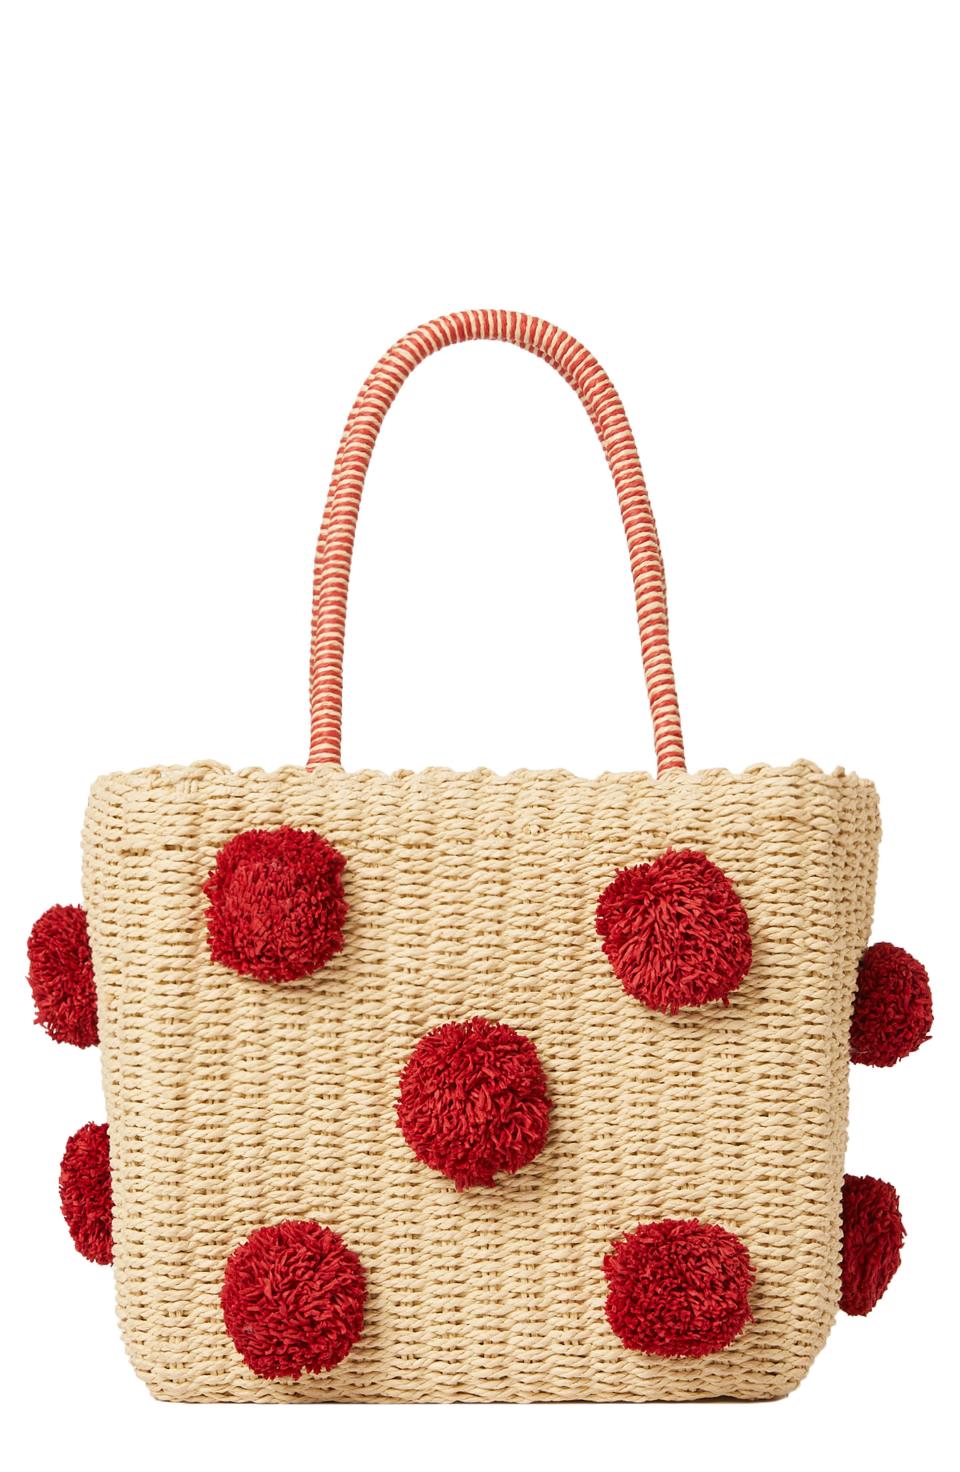 15) btb Los Angeles Brix Mini Straw Tote in Natural/Red at Nordstrom